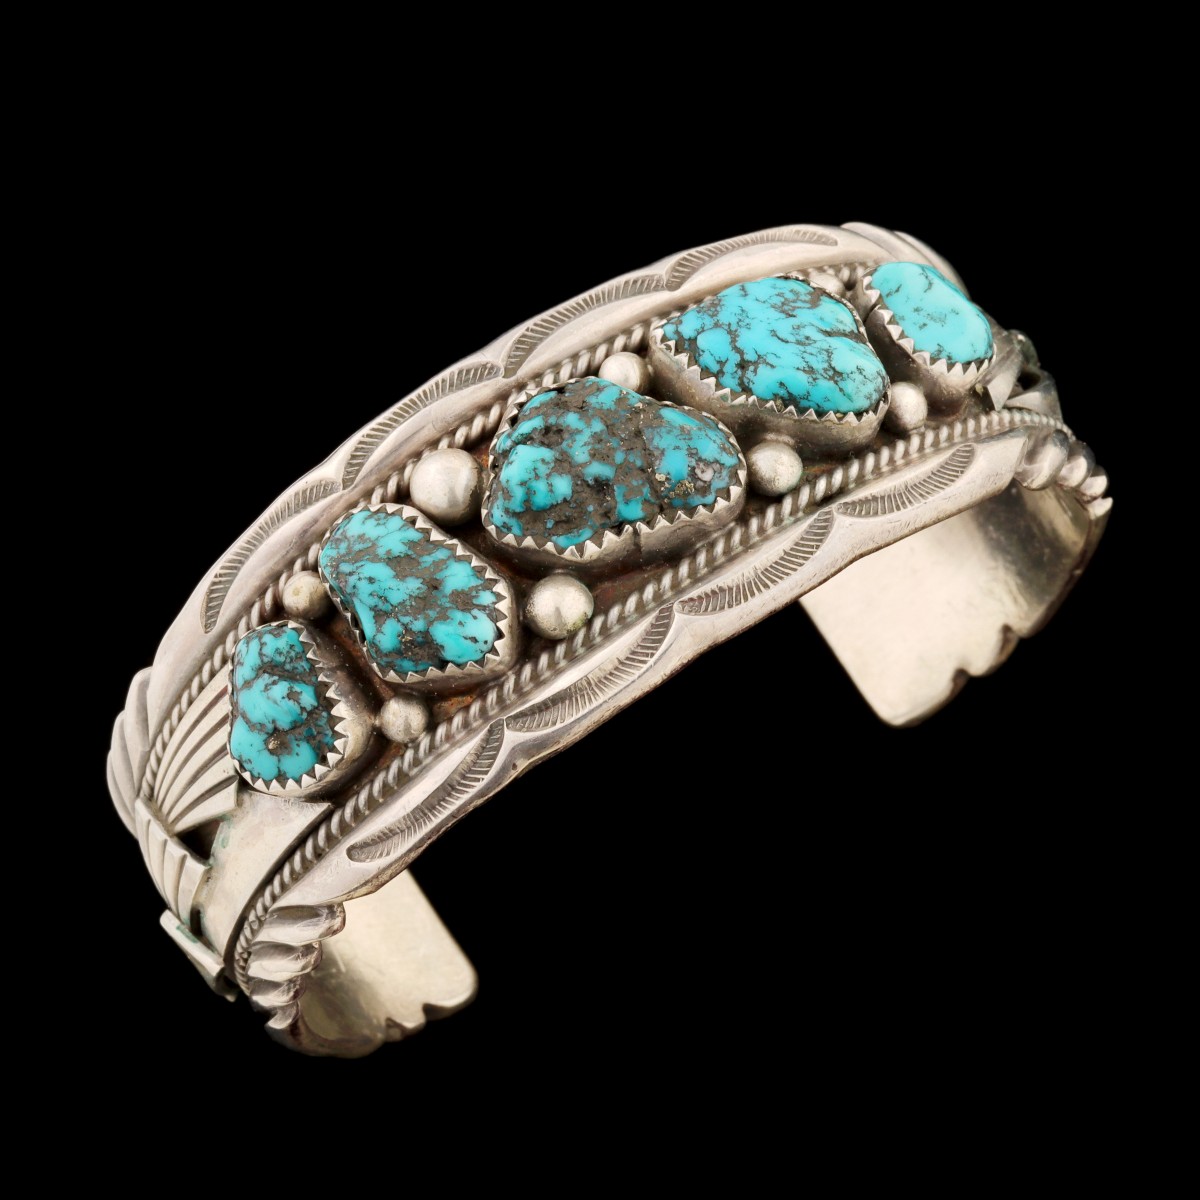 A SILVER AND TURQUOISE BRACELET SIGNED K. MONTOYA